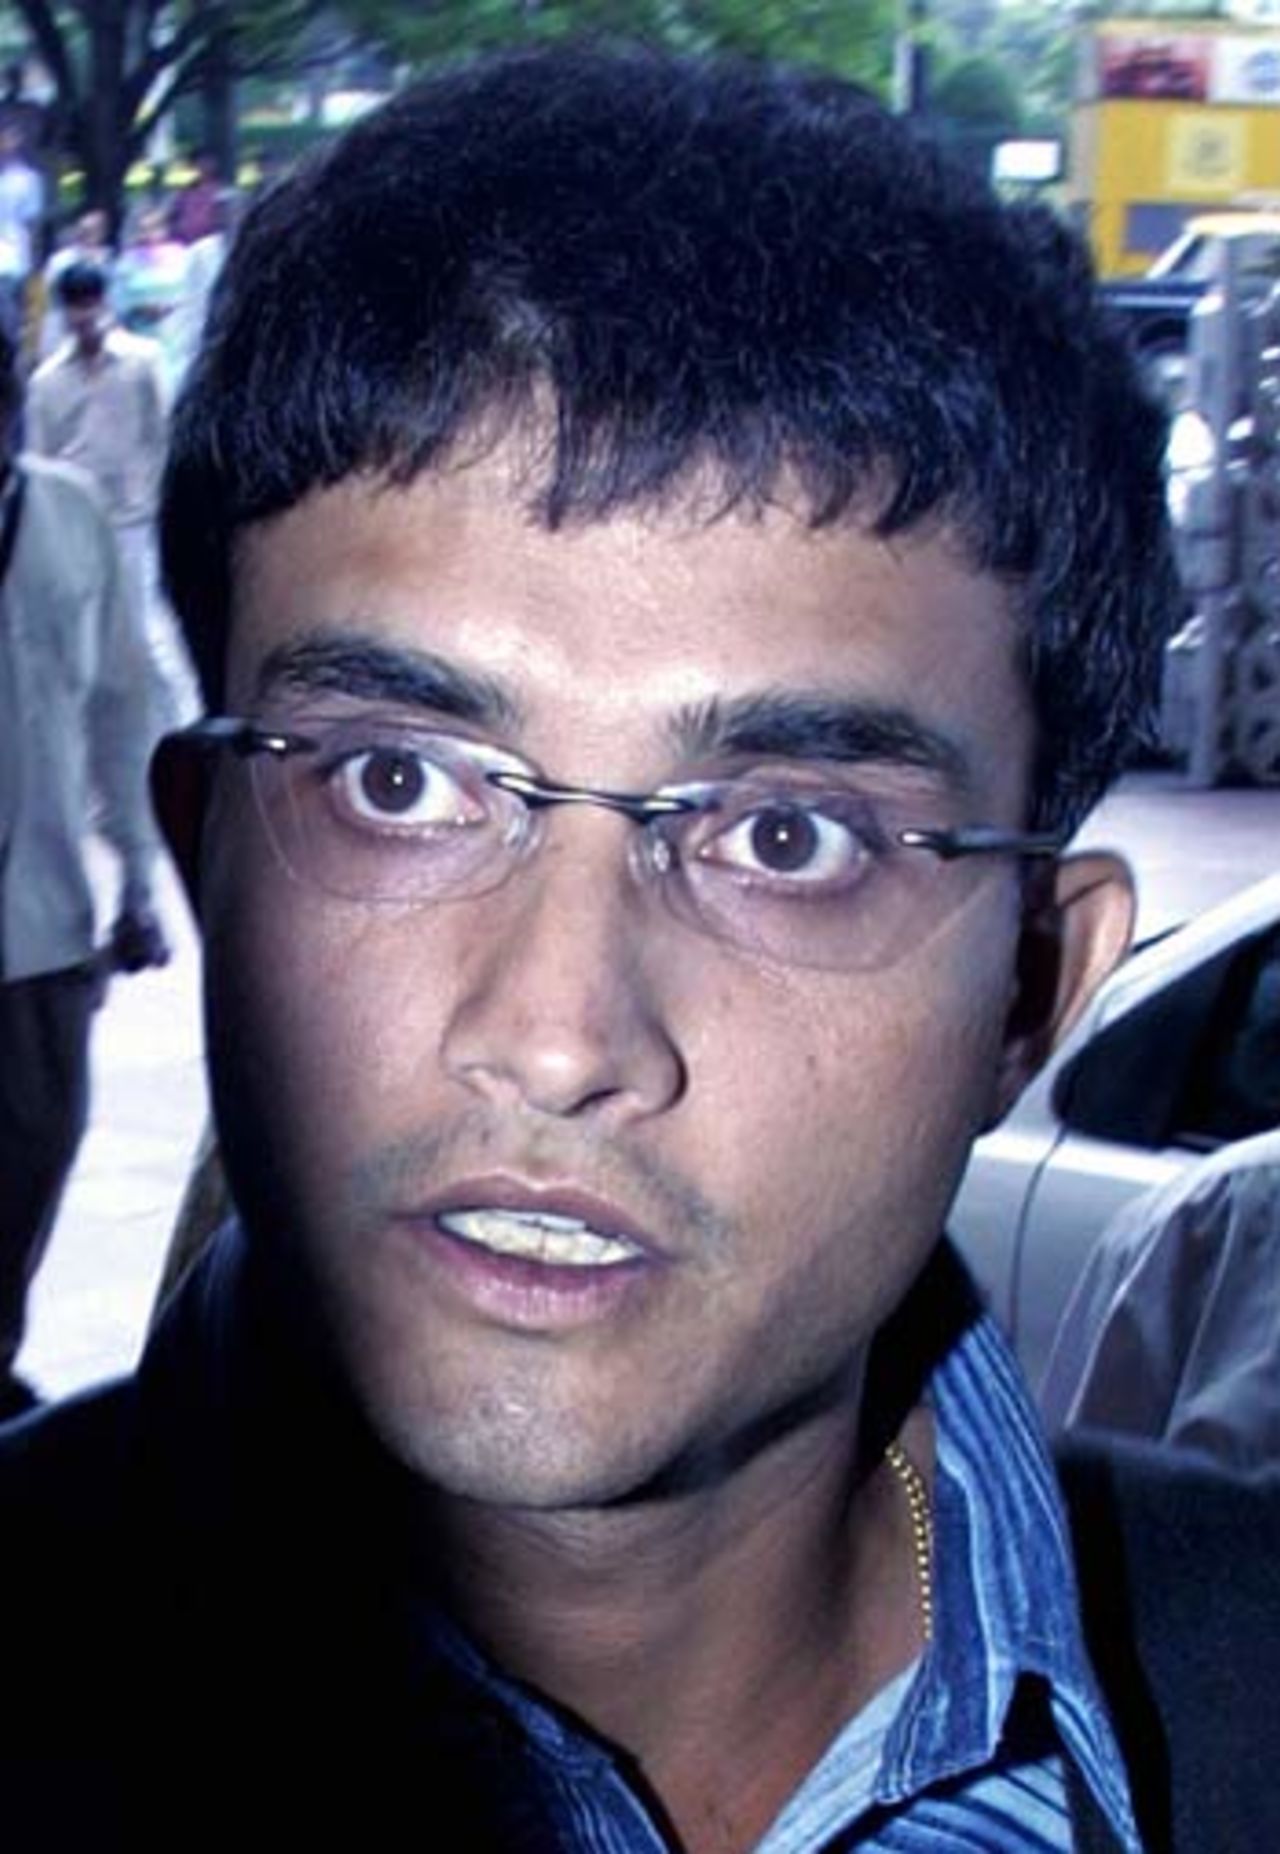 Man in the spotlight: Sourav Ganguly arrives in Mumbai for his appearance in front of the Indian board, September 27, 2005